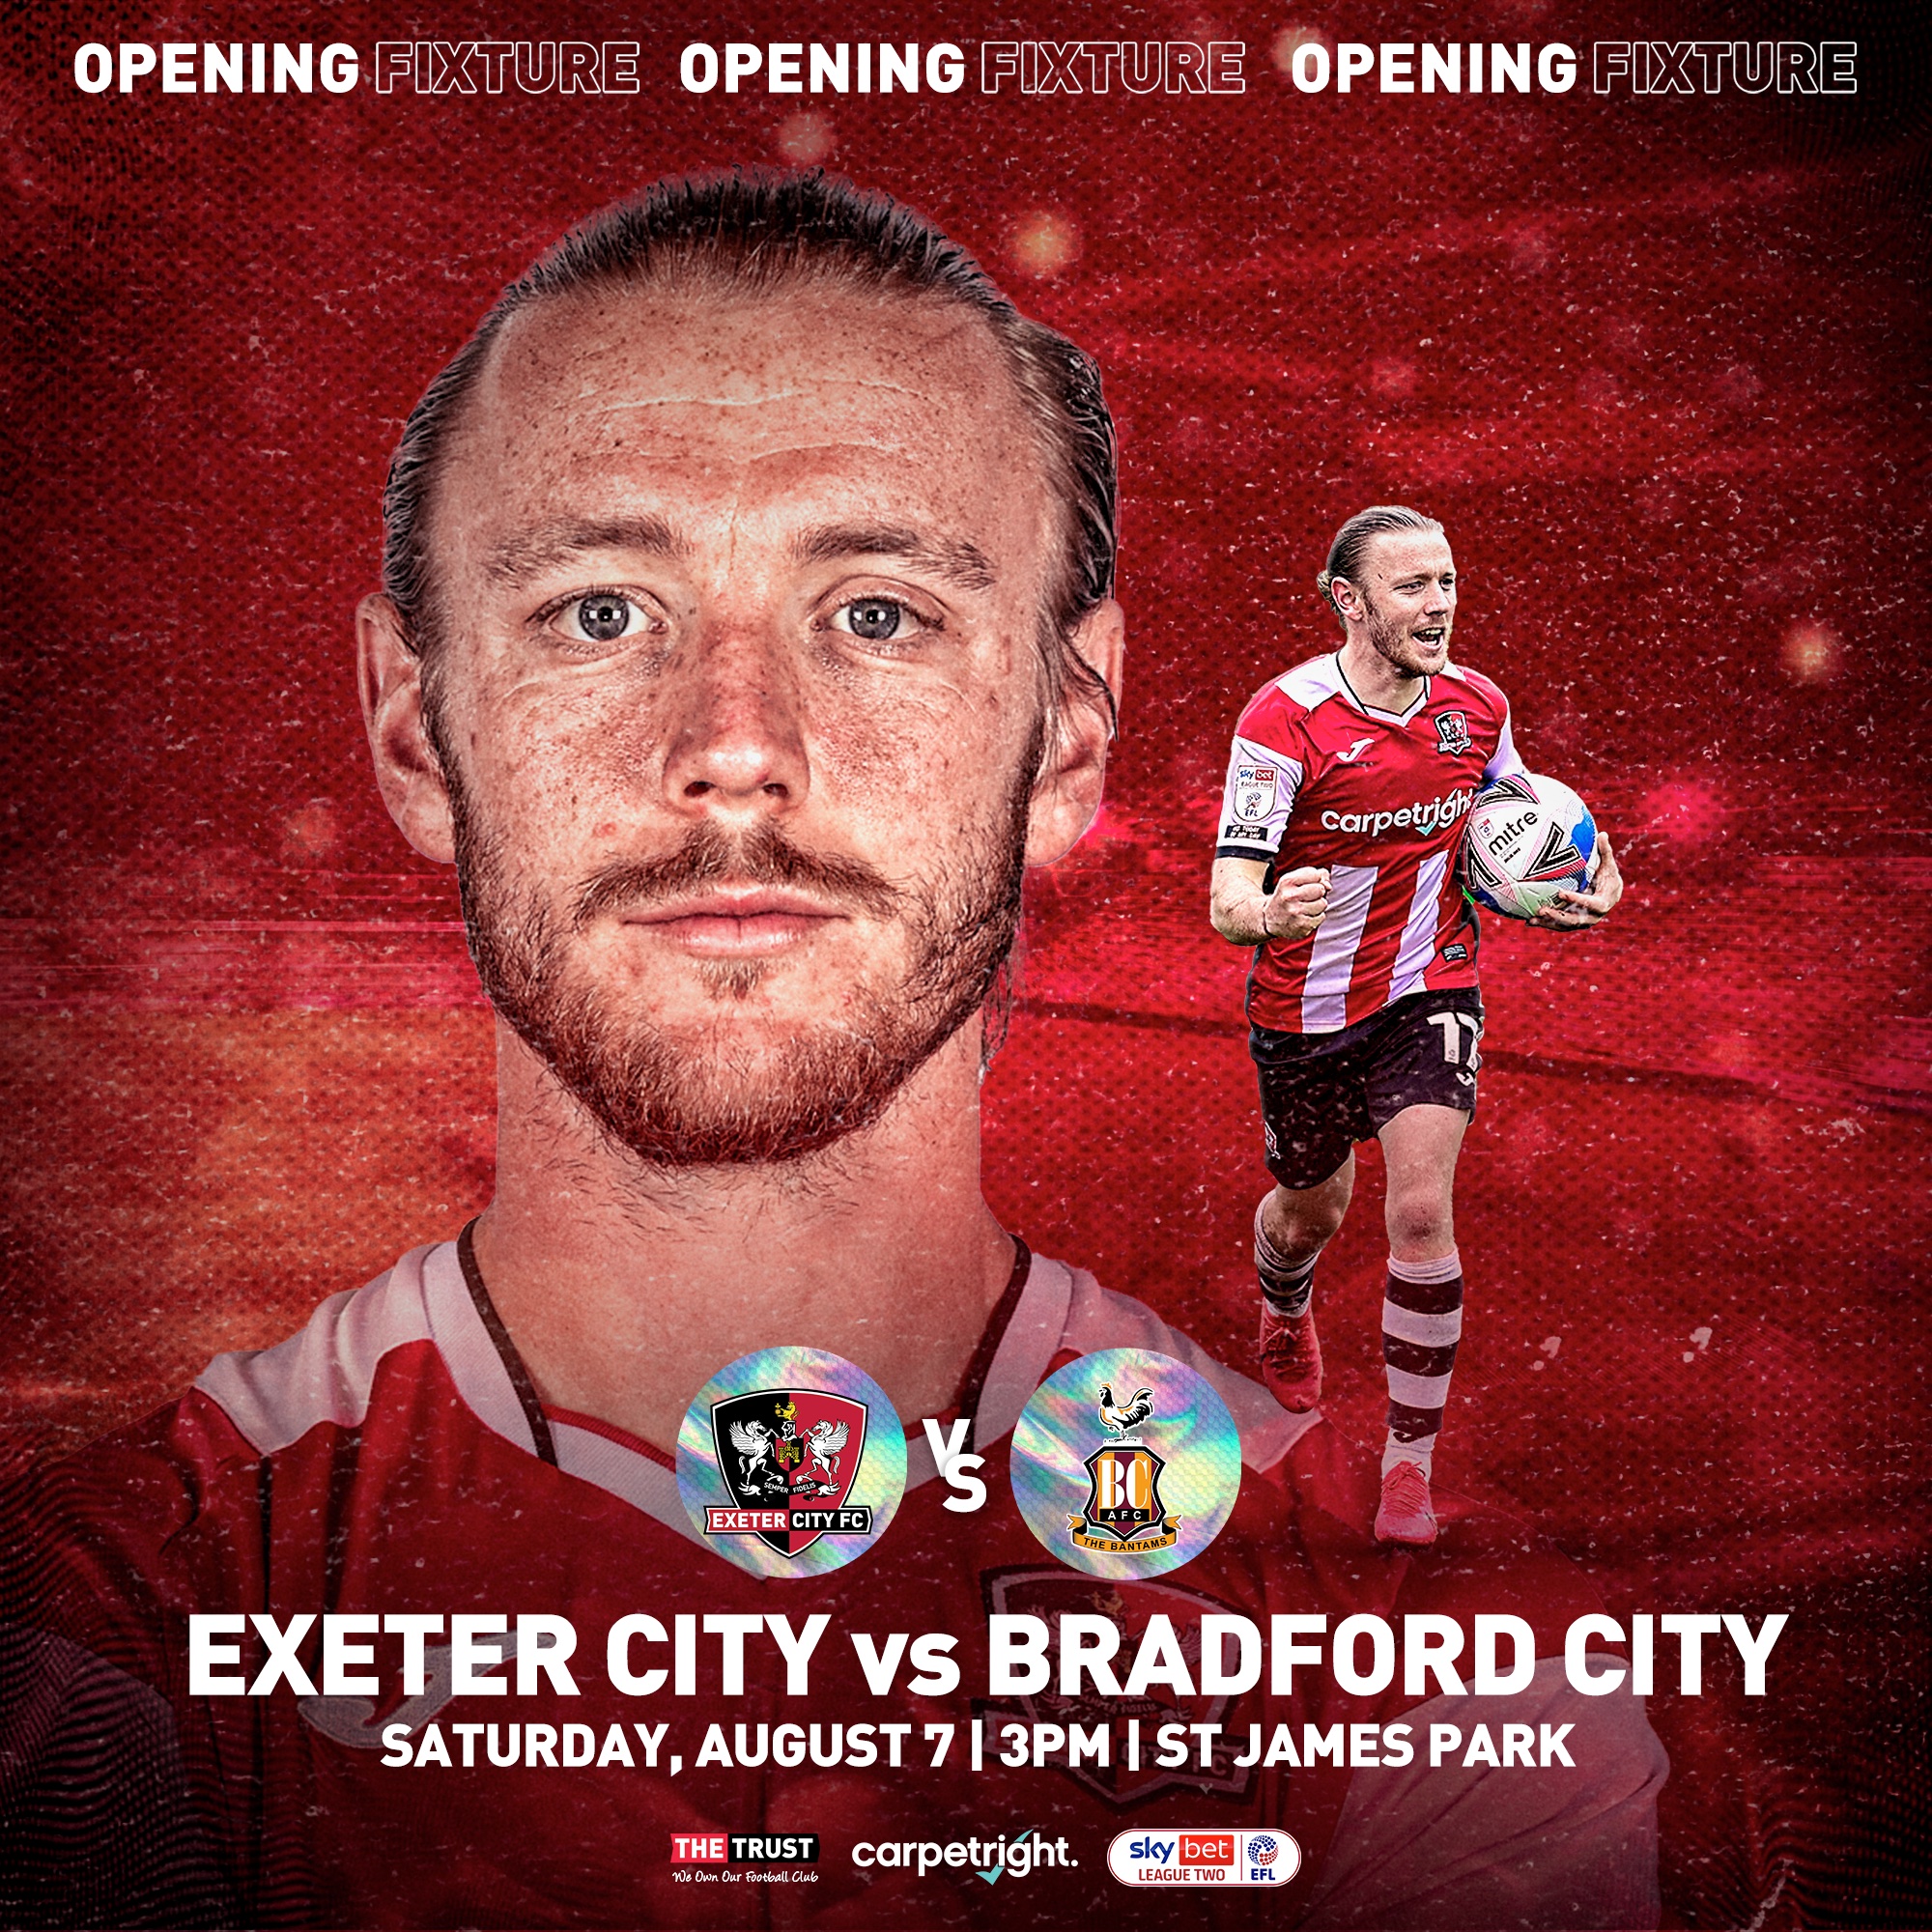 Exeter City City Will Kick Off The 2 1 2 2 Season At St James Park On Saturday August 7 Against Officialbantams In A 3pm Kick Off We Can T Wait To Have You